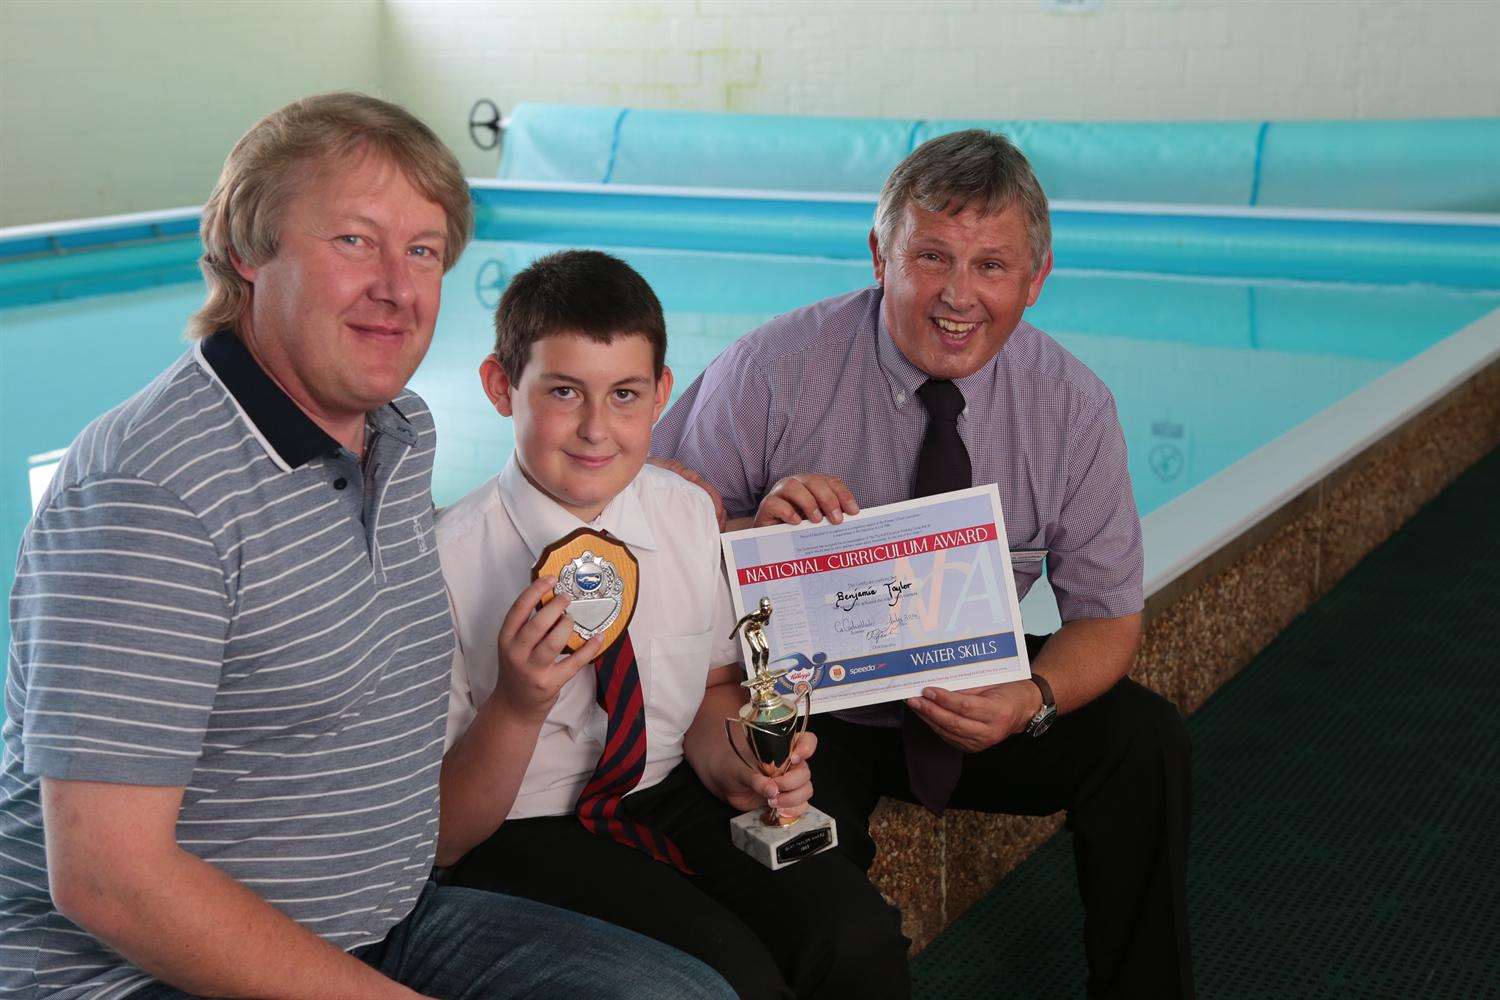 Benjamin is the 3rd generation of the family to learn to swim in the pool after his granddad raised money to open it in 1974